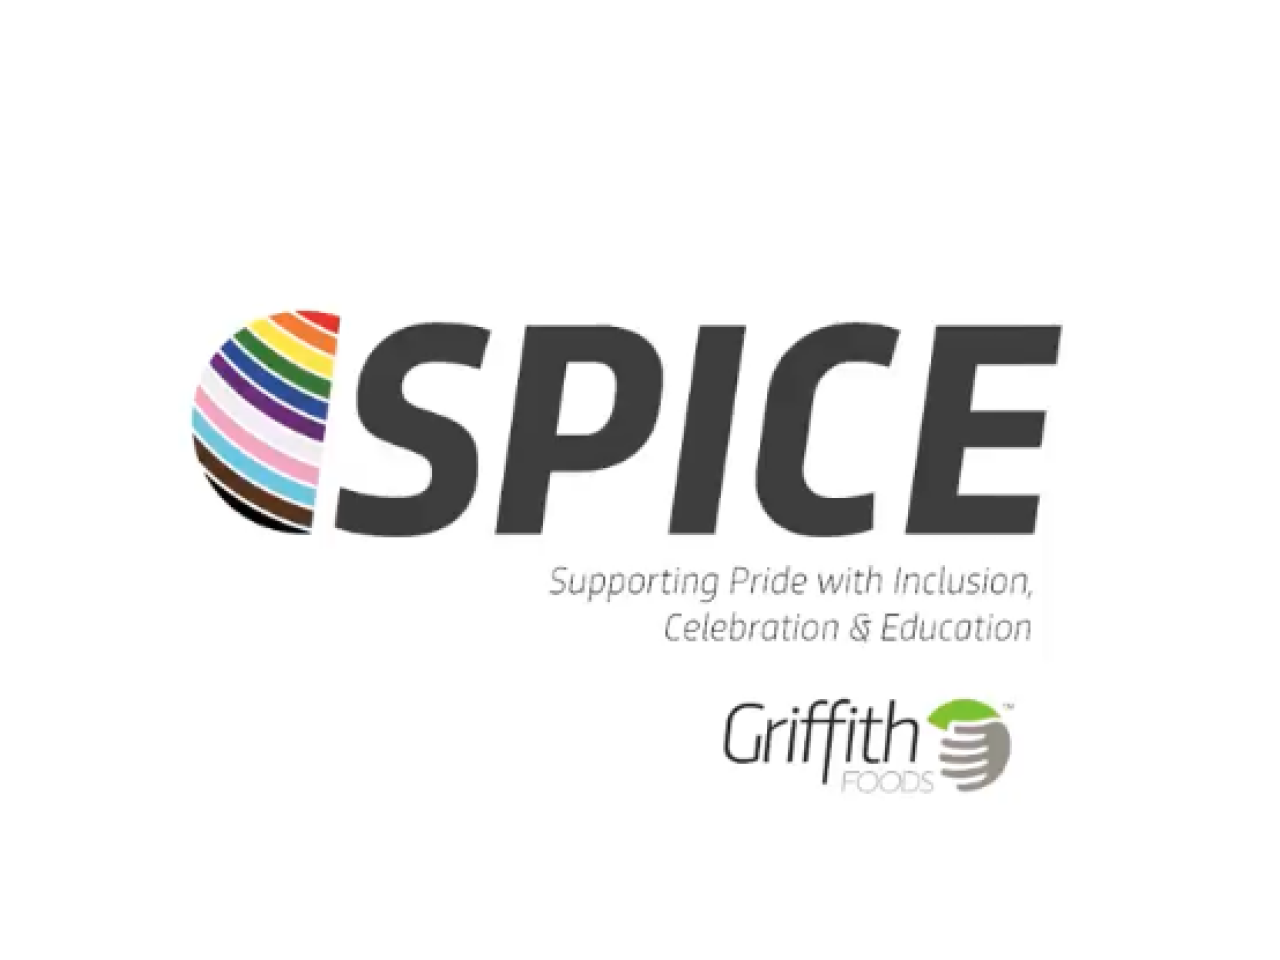 SPICE and Griffith Foods logos